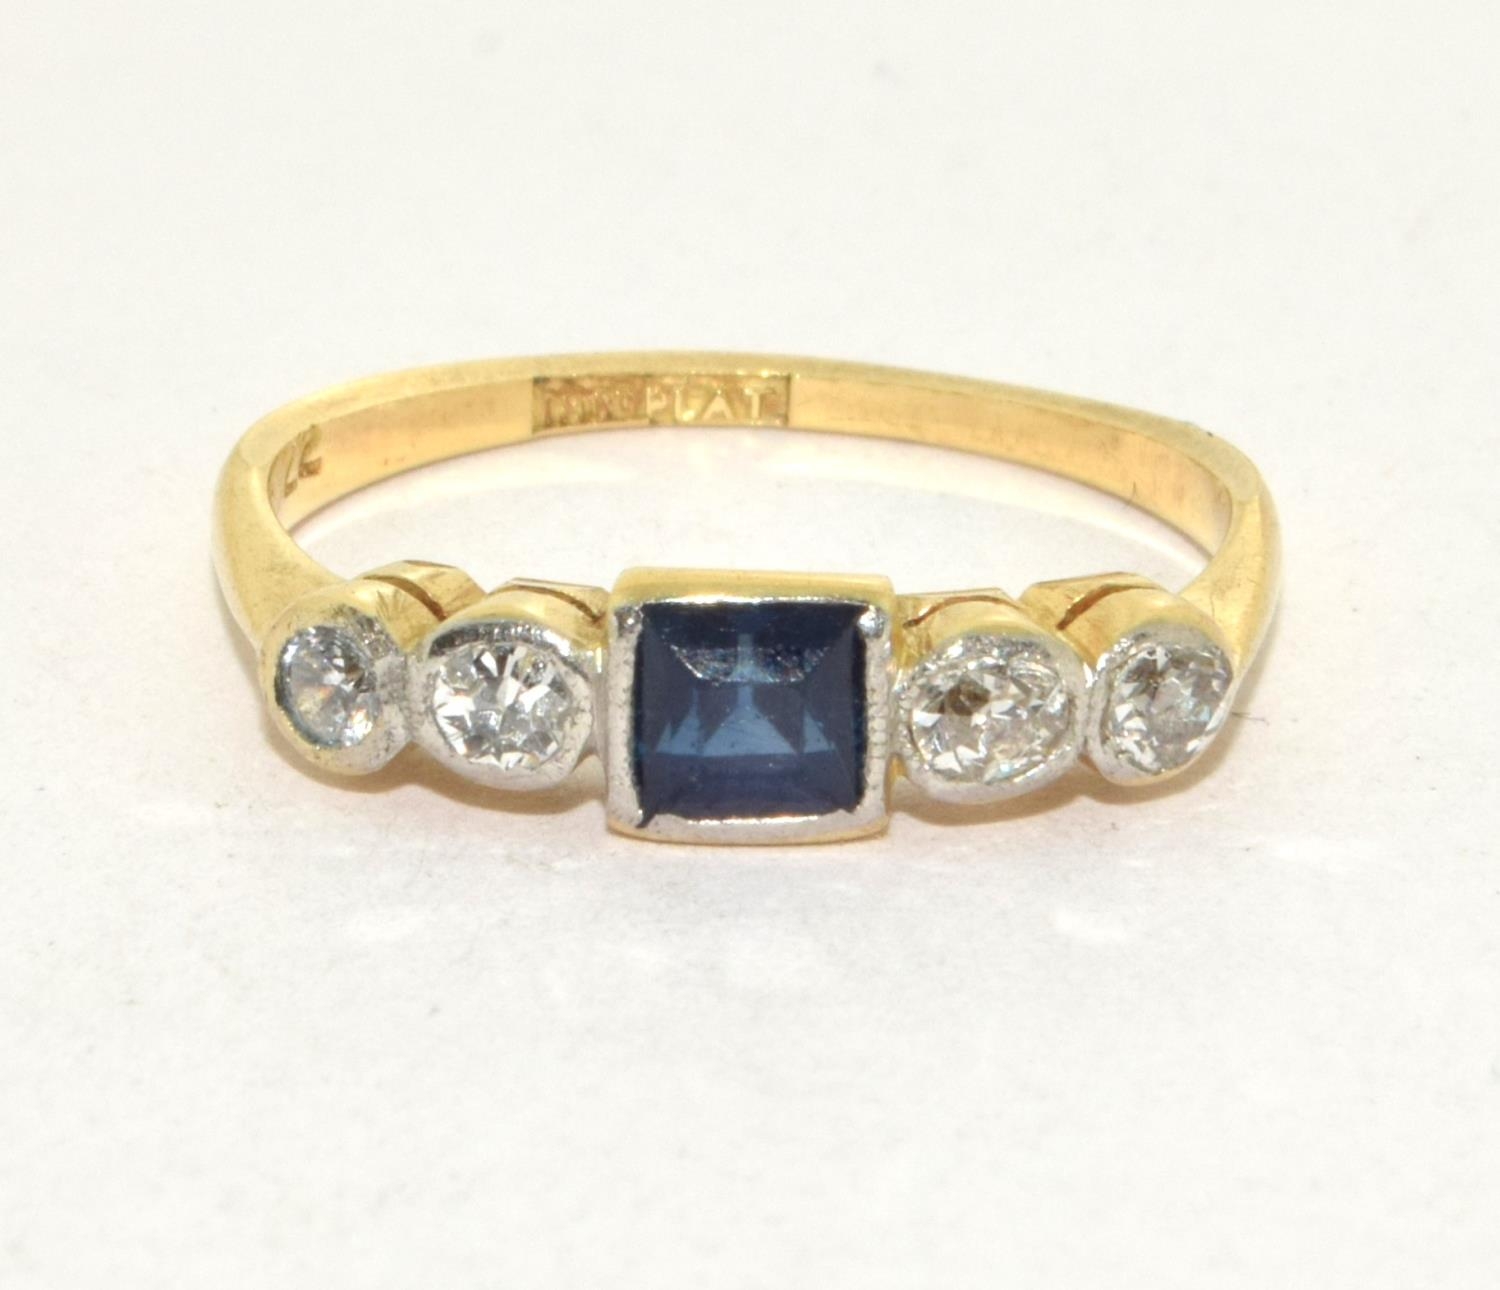 Antique 18ct gold and Platinum Diamond and Sapphire ring 2.2g size M - Image 5 of 5